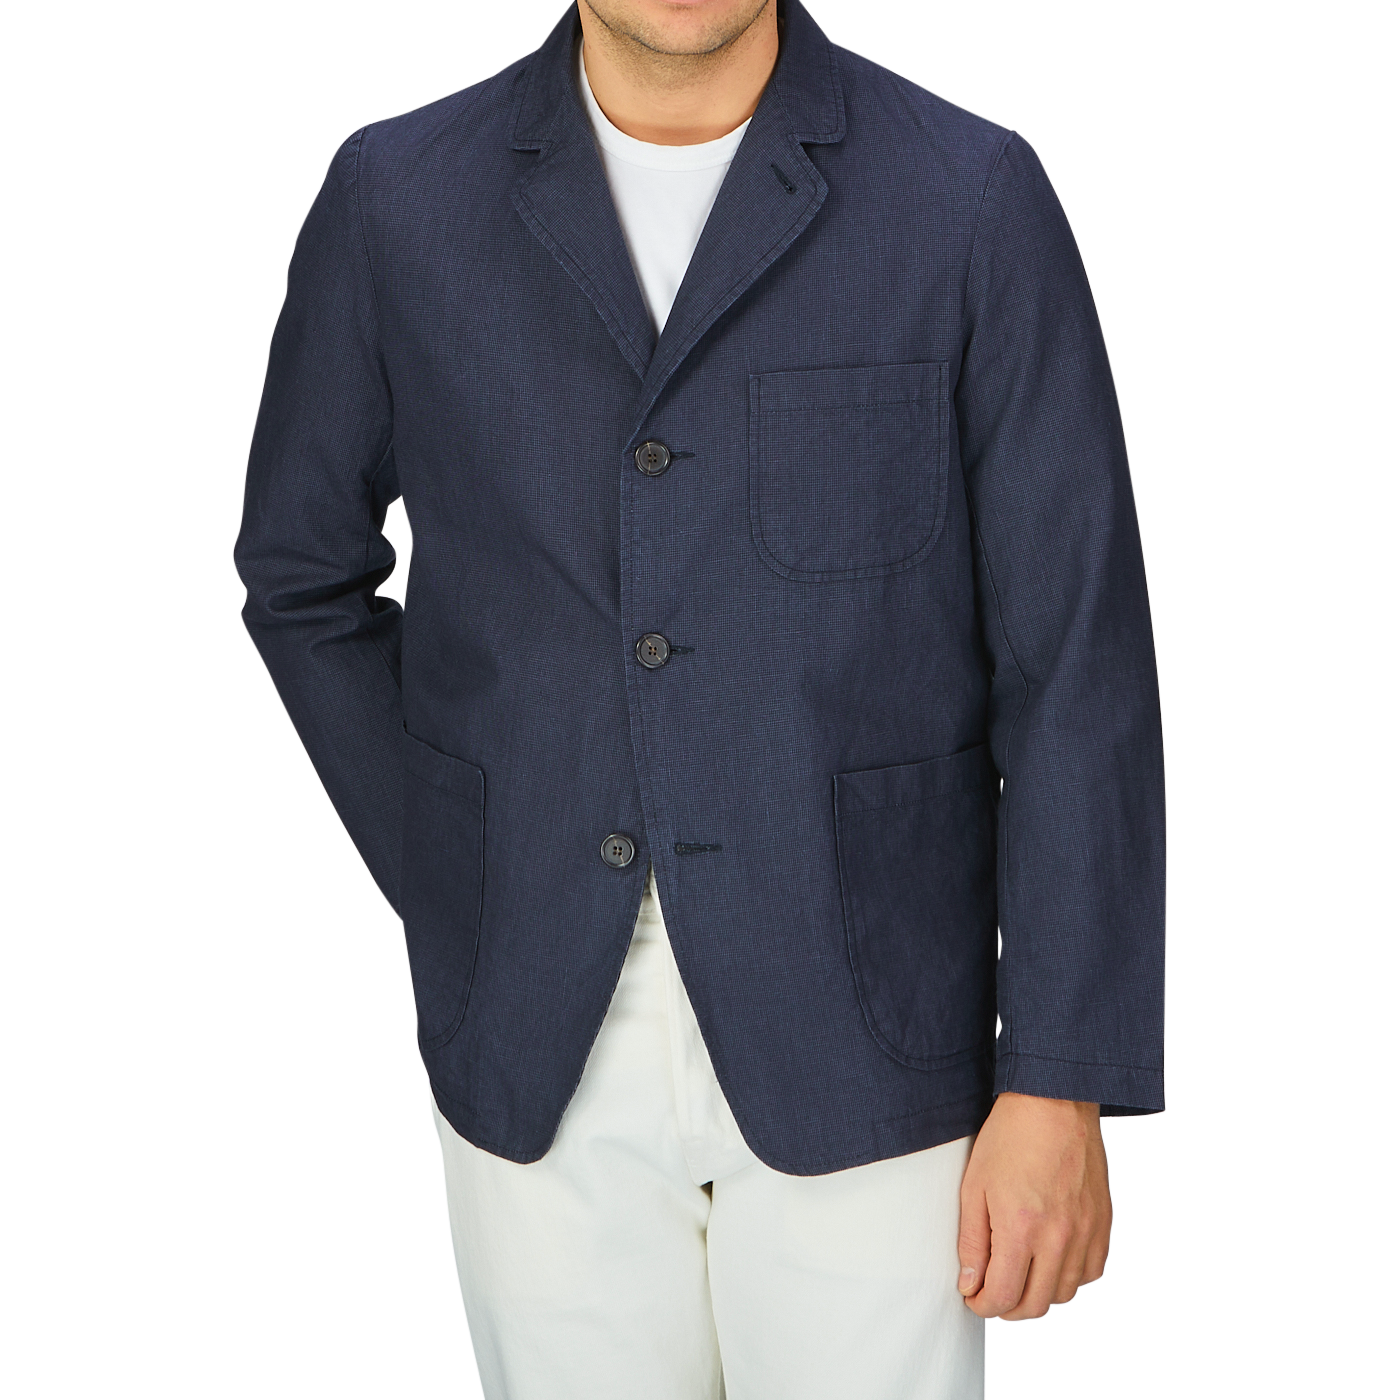 A man wearing a Universal Works Navy Puppytooth Linen Cotton 3-Button Jacket and white pants.